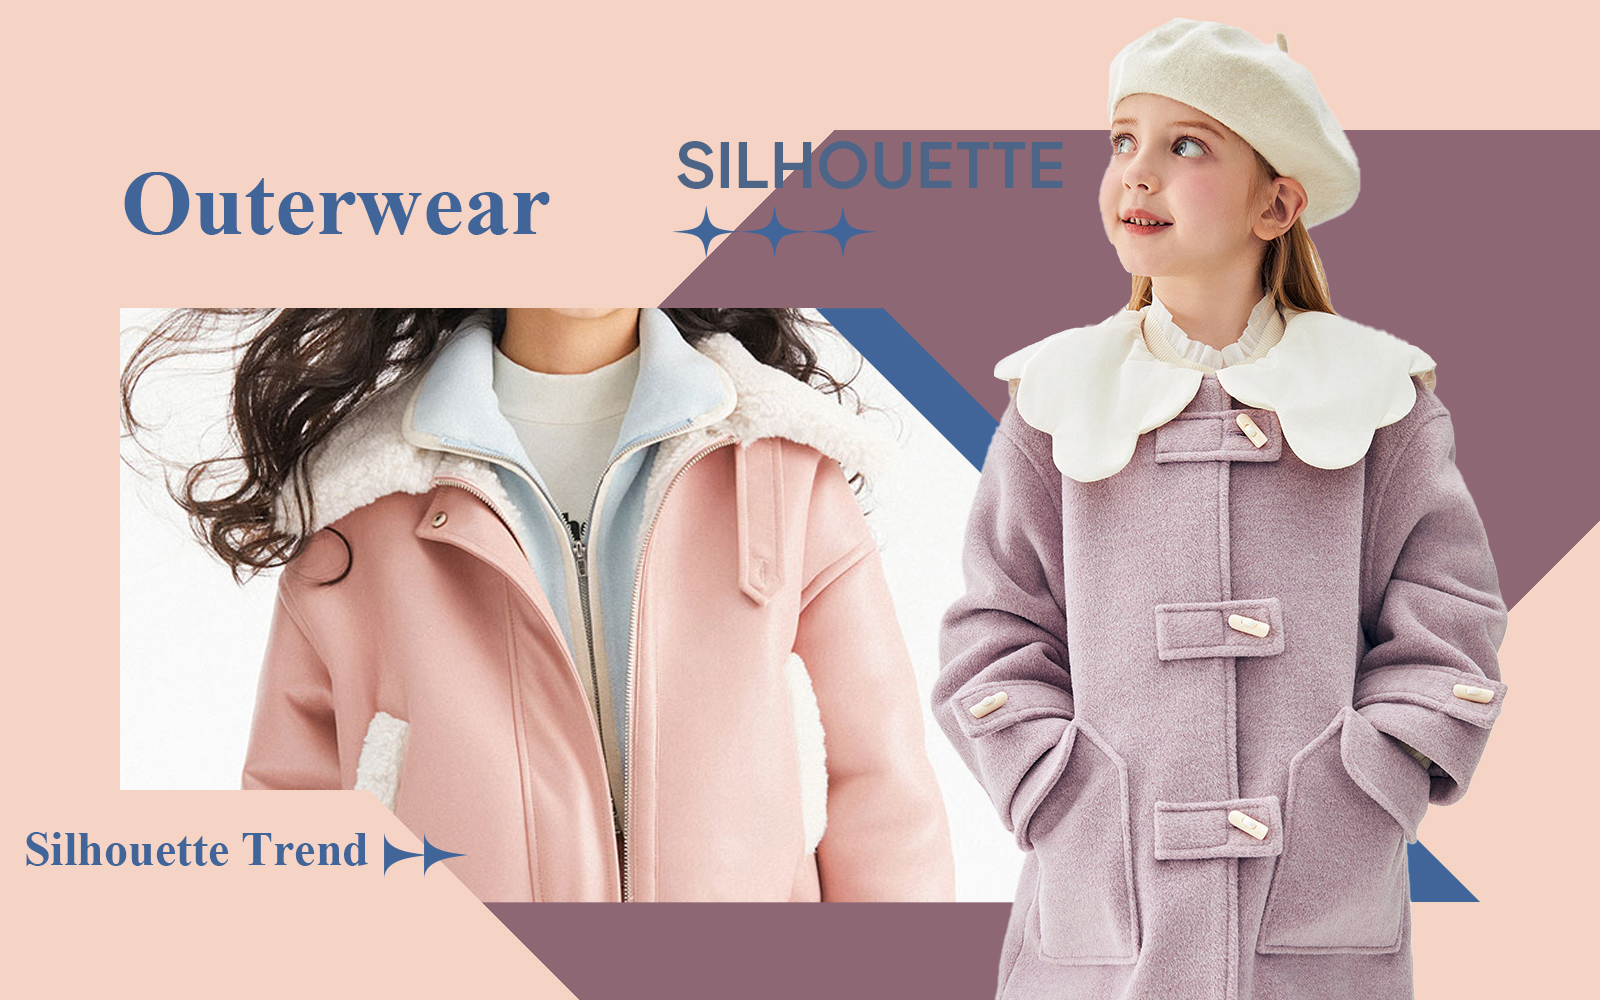 Outerwear -- The Silhouette Trend for Kidswear